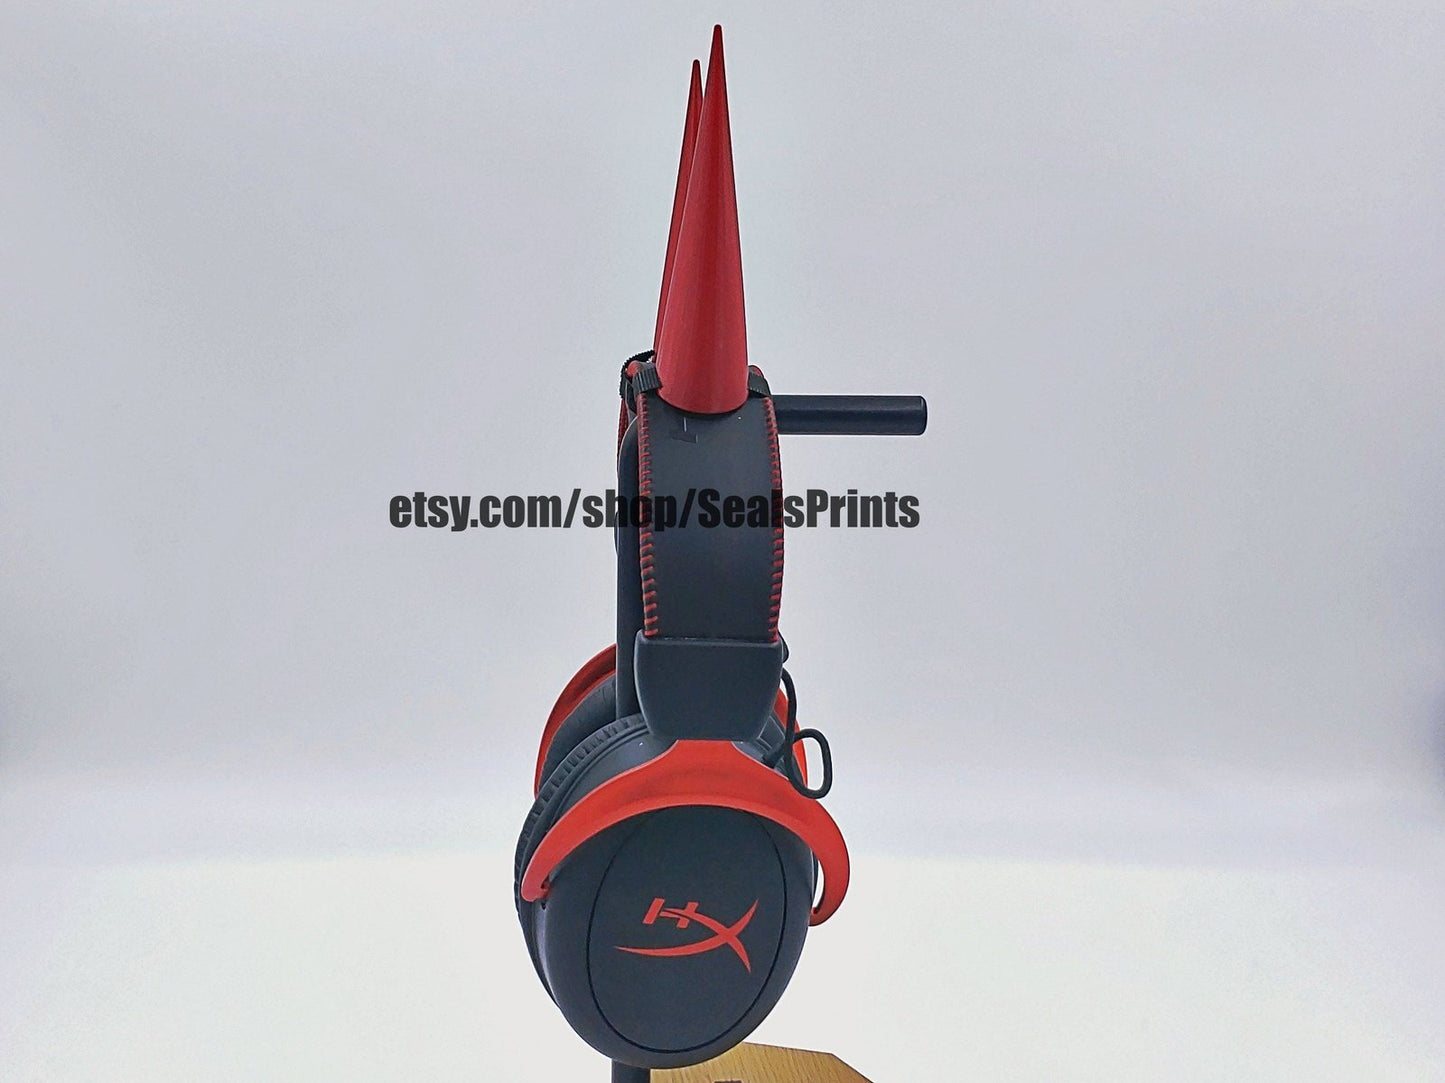 Power Horns Attachment for Headset, Gaming and Streaming Headset Accessories, cosplay, goat horns, bull horns, gaming streamer gift